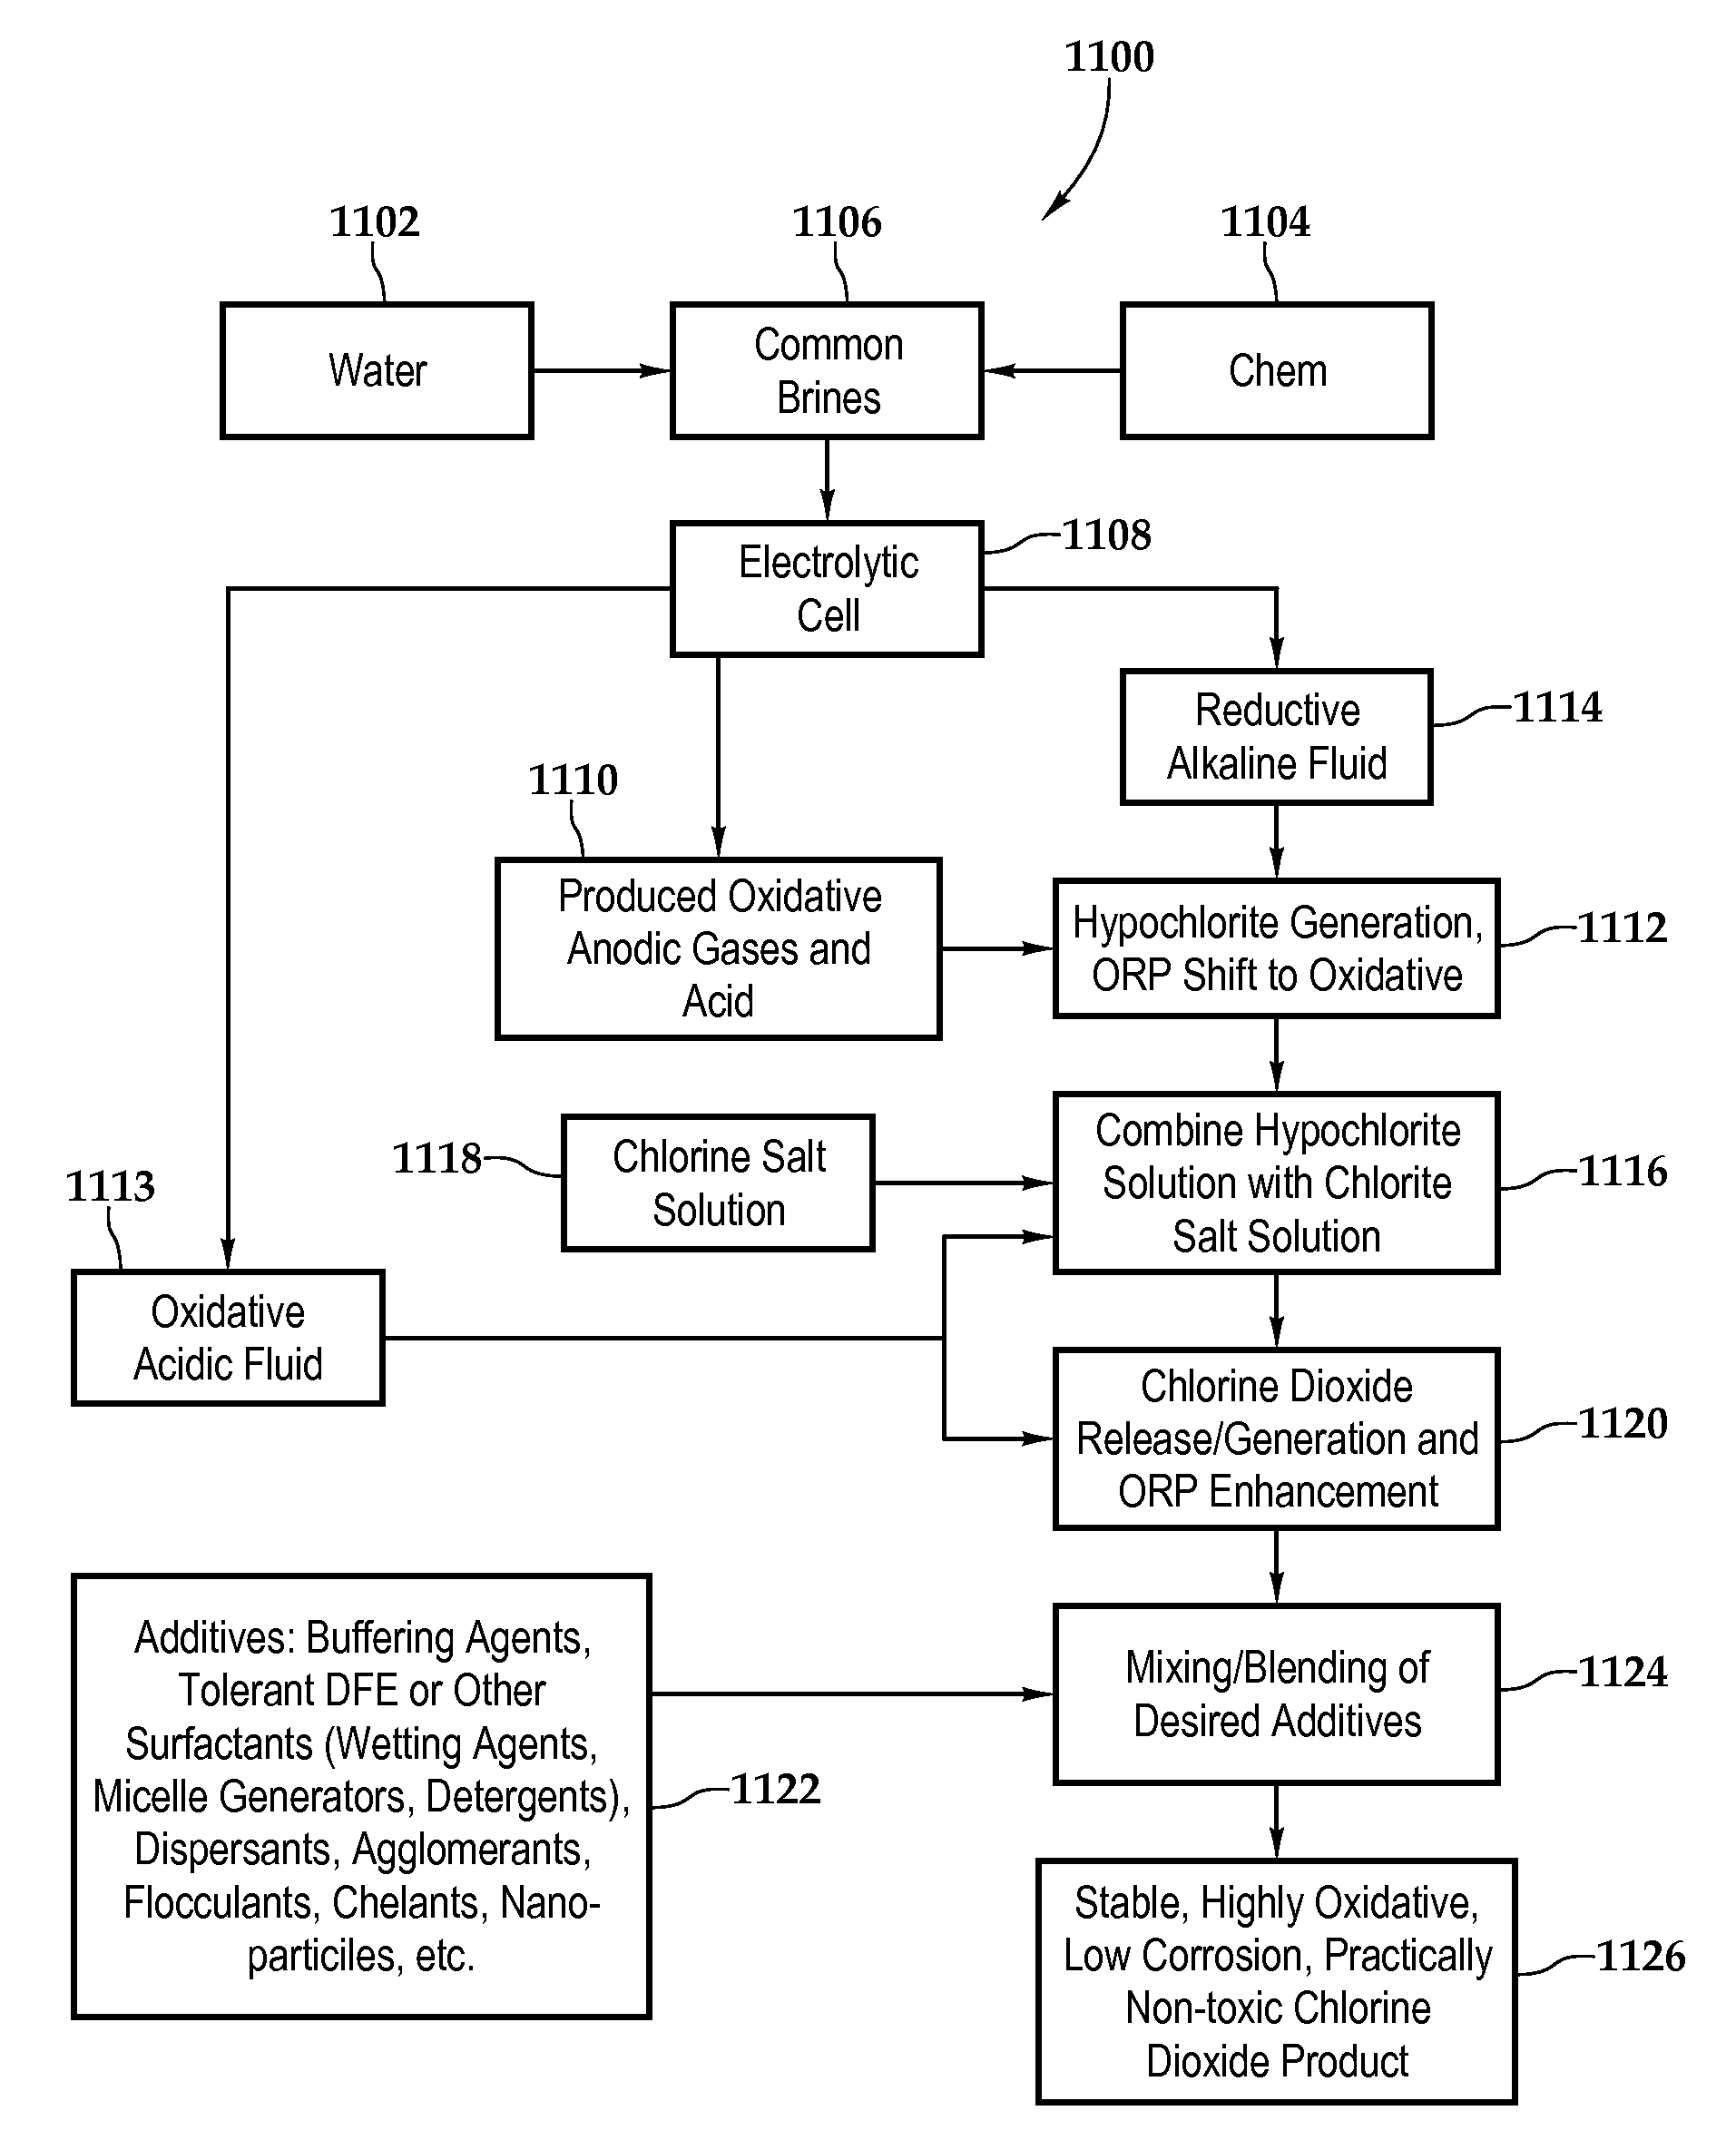 Electrolytic system and method for generating biocides having an electron deficient carrier fluid and chlorine dioxide